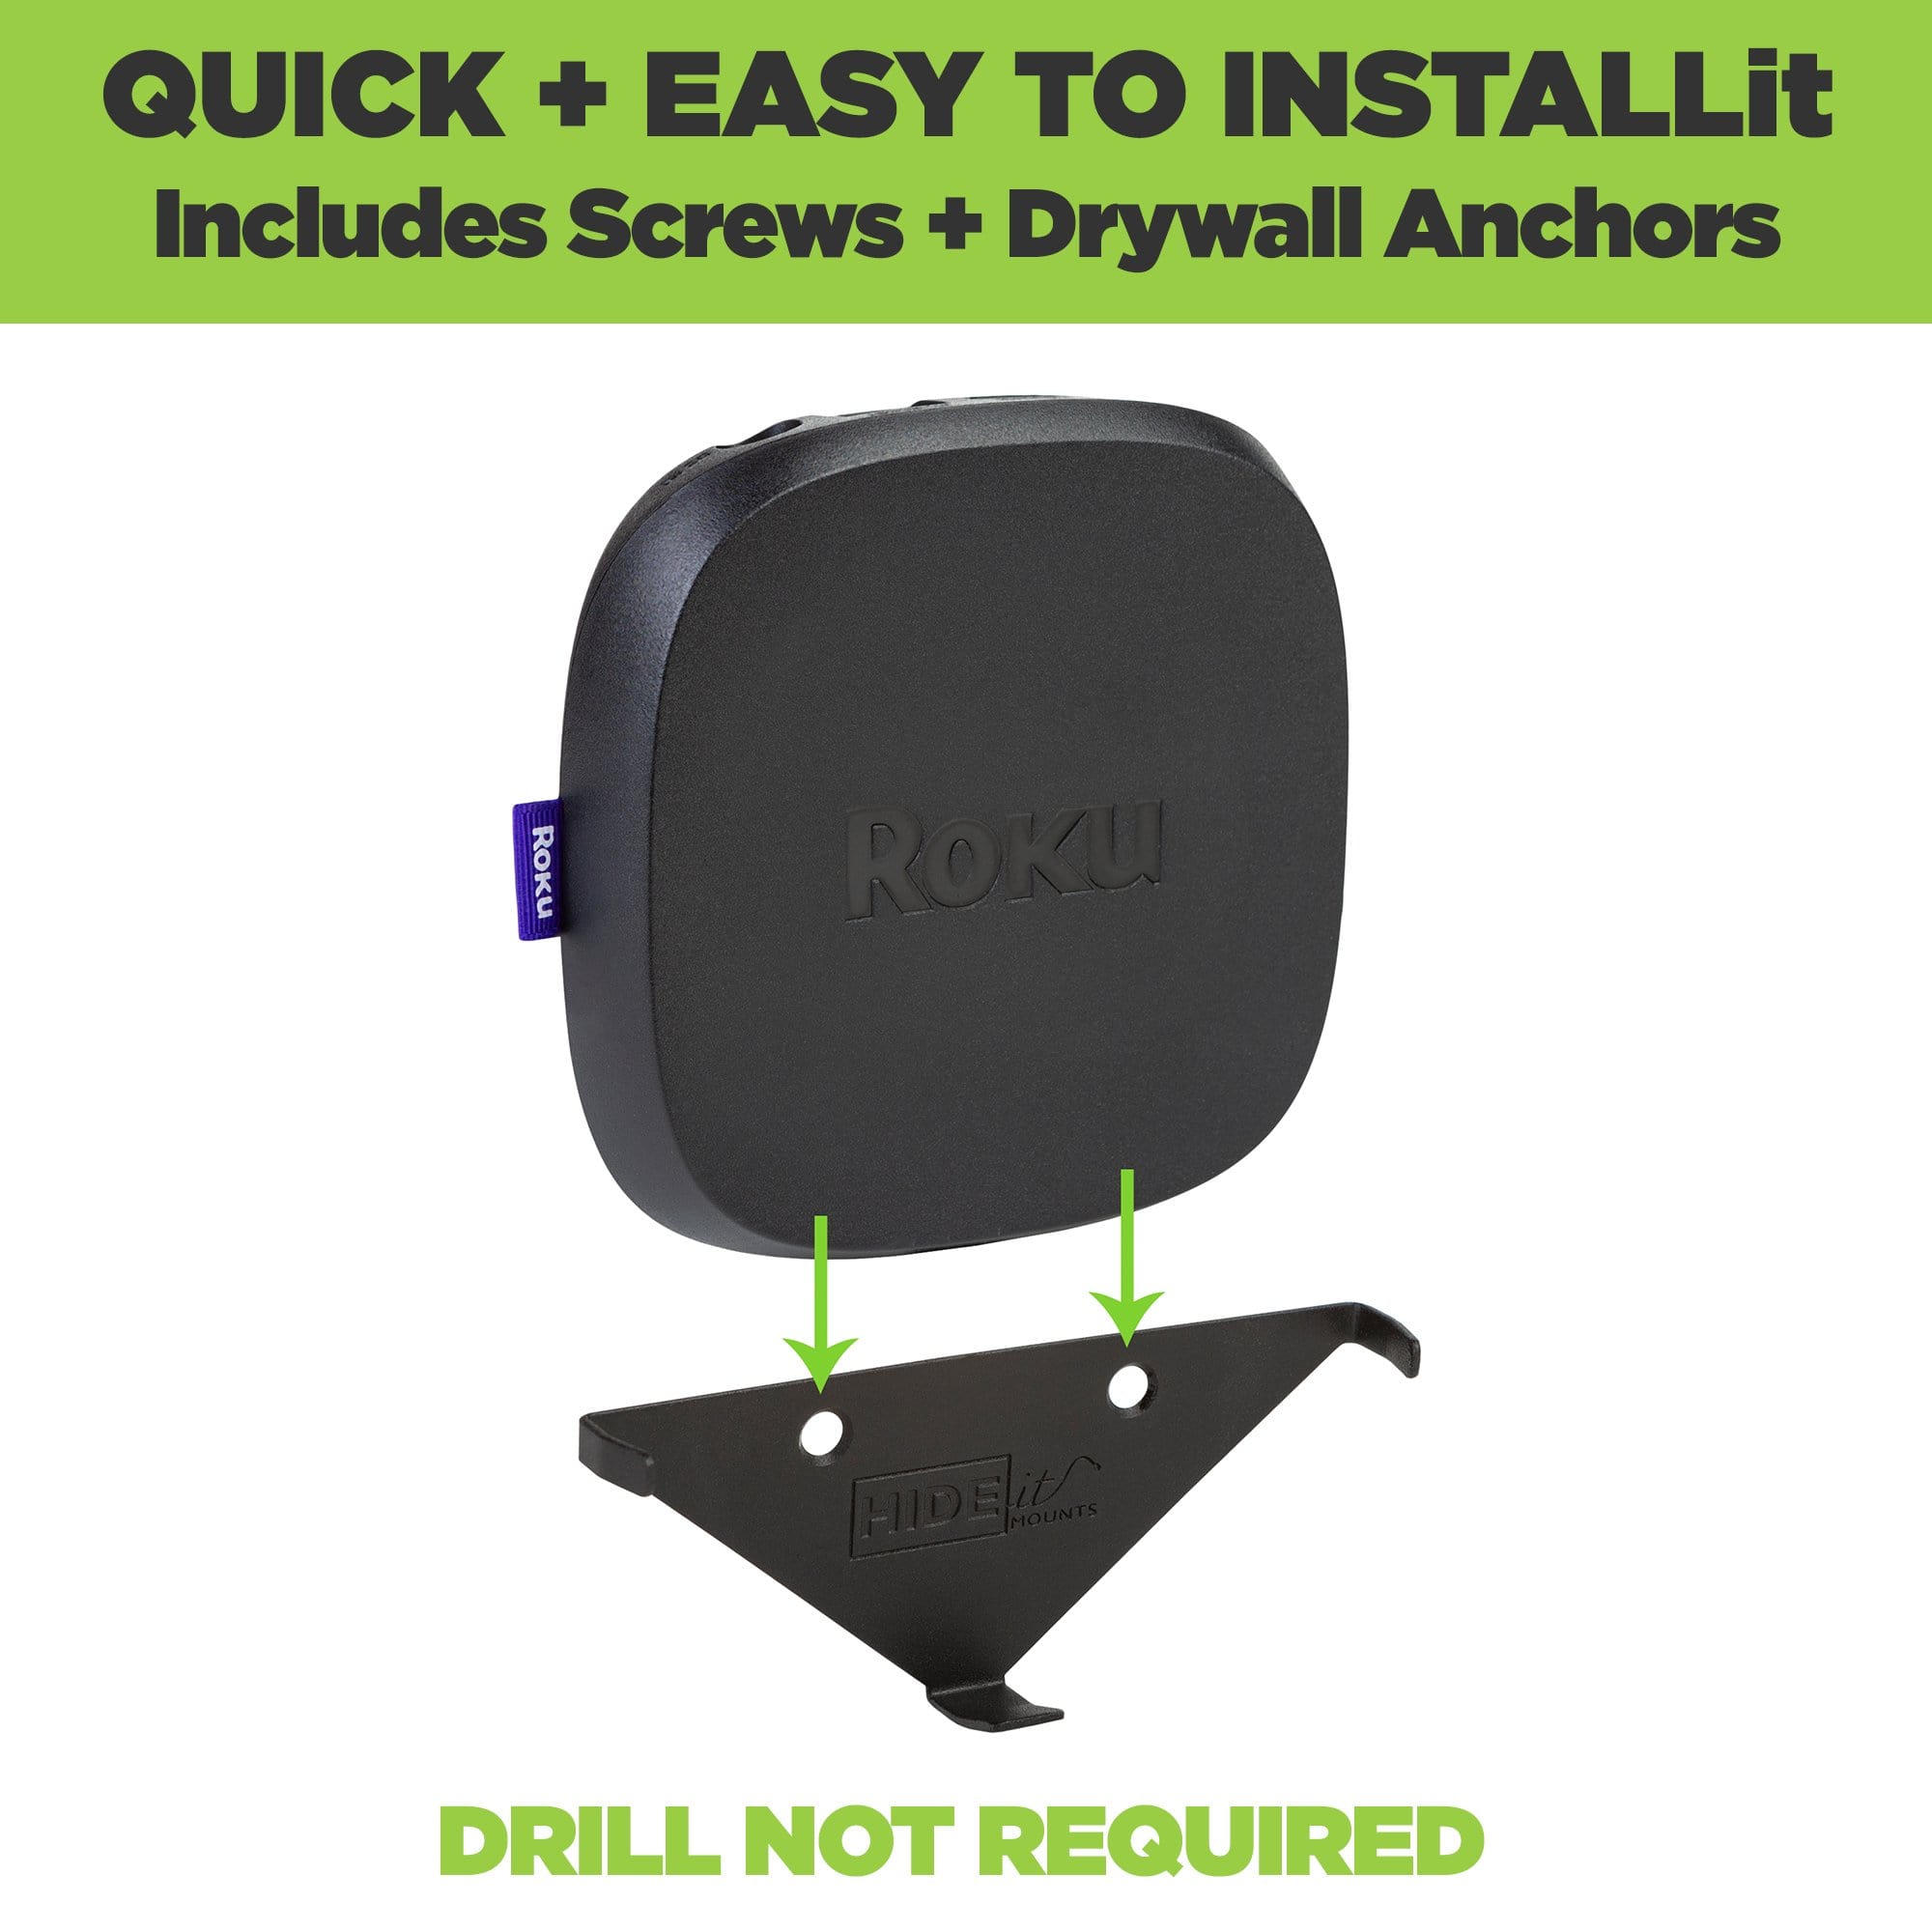 The new HIDEit Roku Mount is quick + easy to install. Create an clean media setup in minutes with HIDEit Mounts.